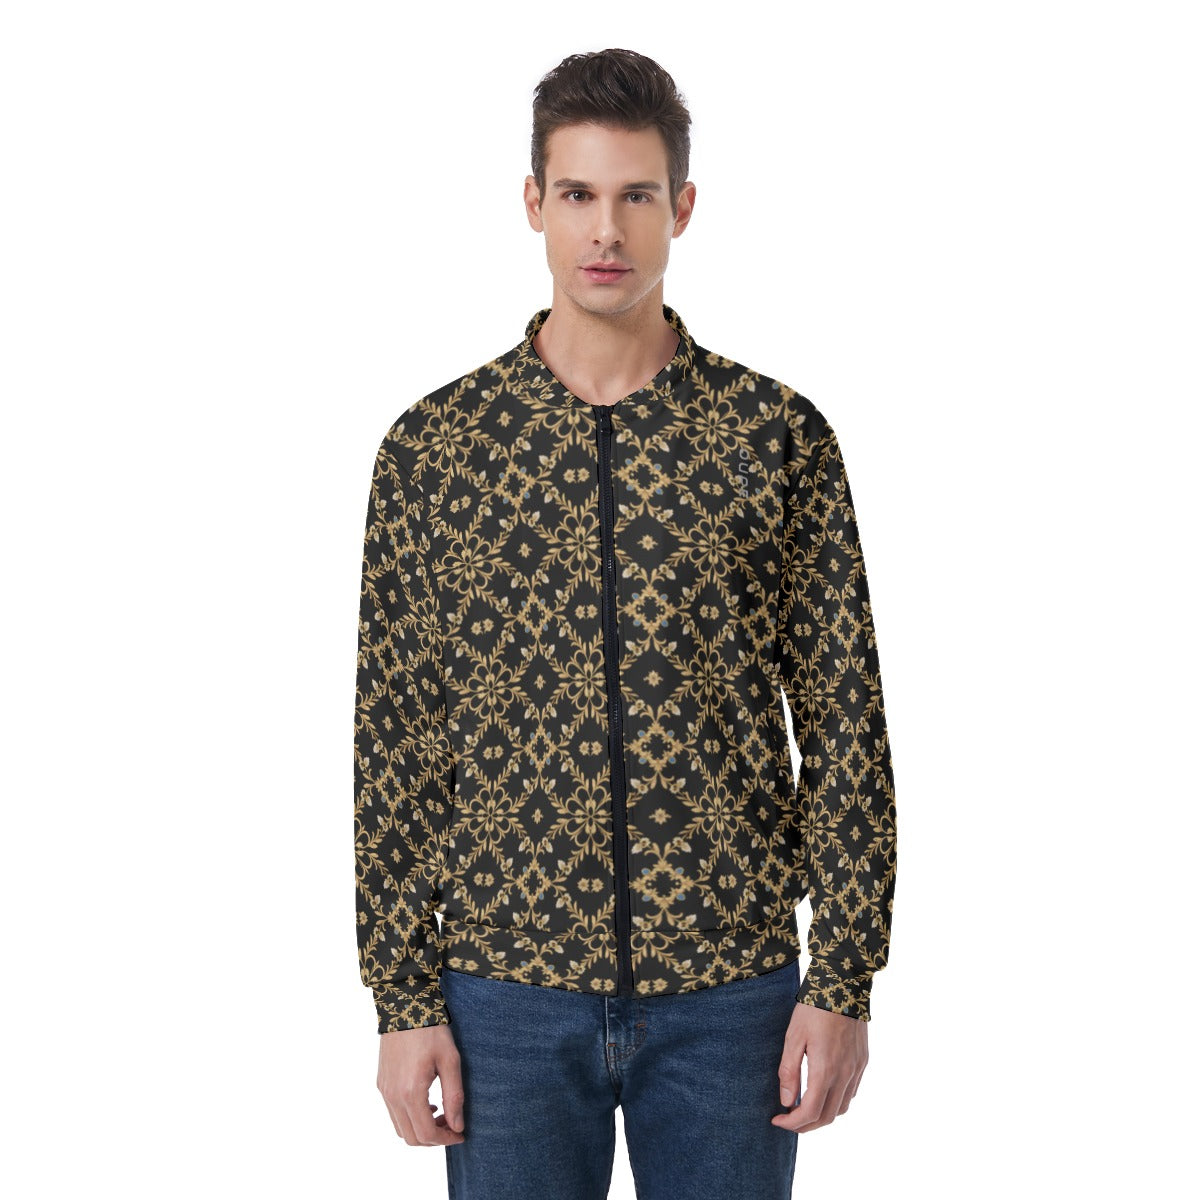 OUPE BAROQUE Men's DAY JACKET